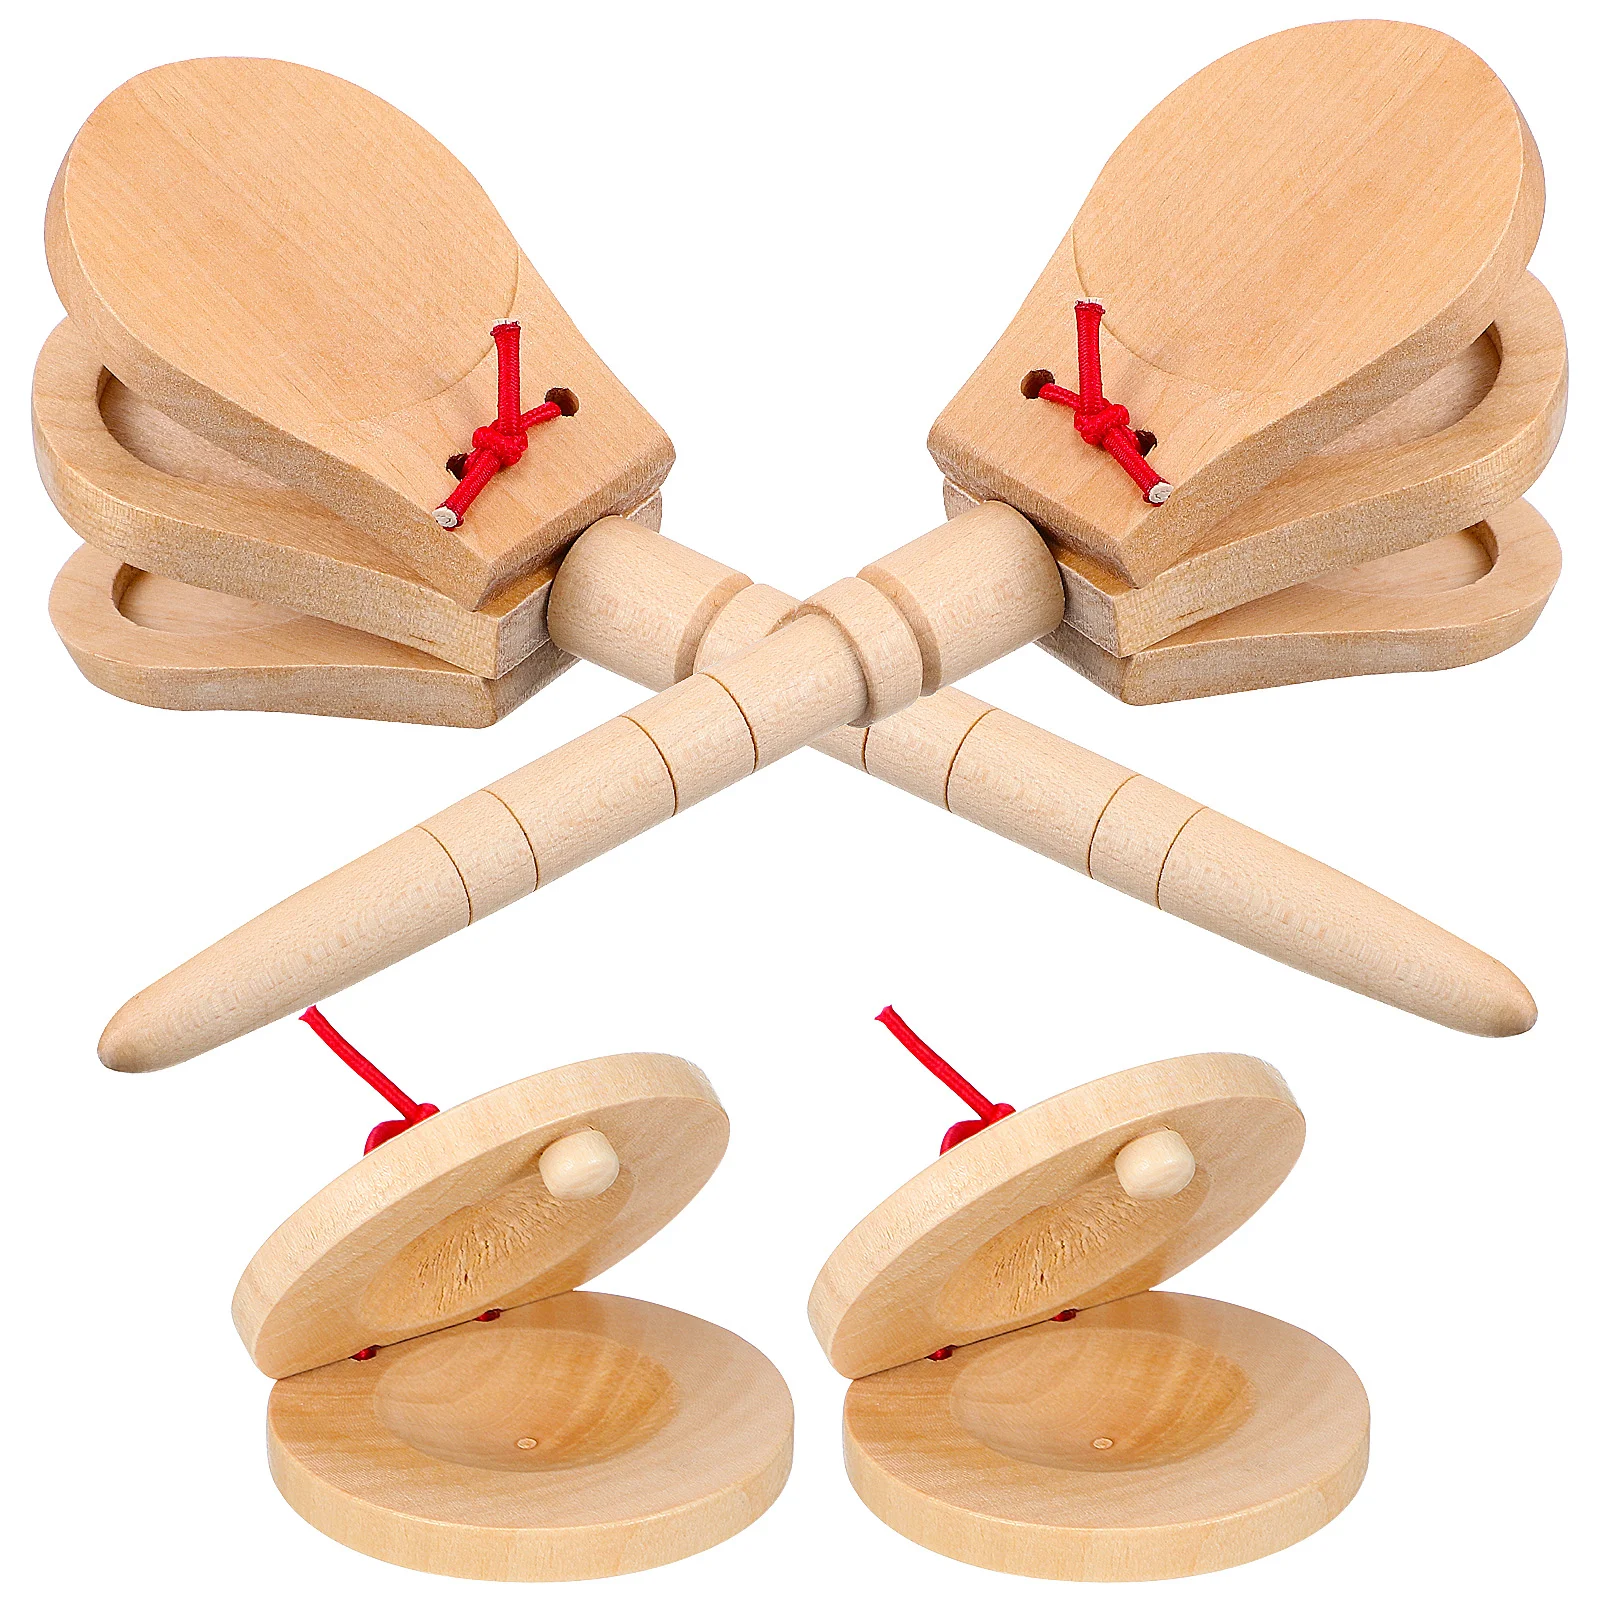 

4 Pcs Castanet Toys Finger Wood Flapper Waving Board Percussion Castanets Musical Instruments Wooden Practice Preschool